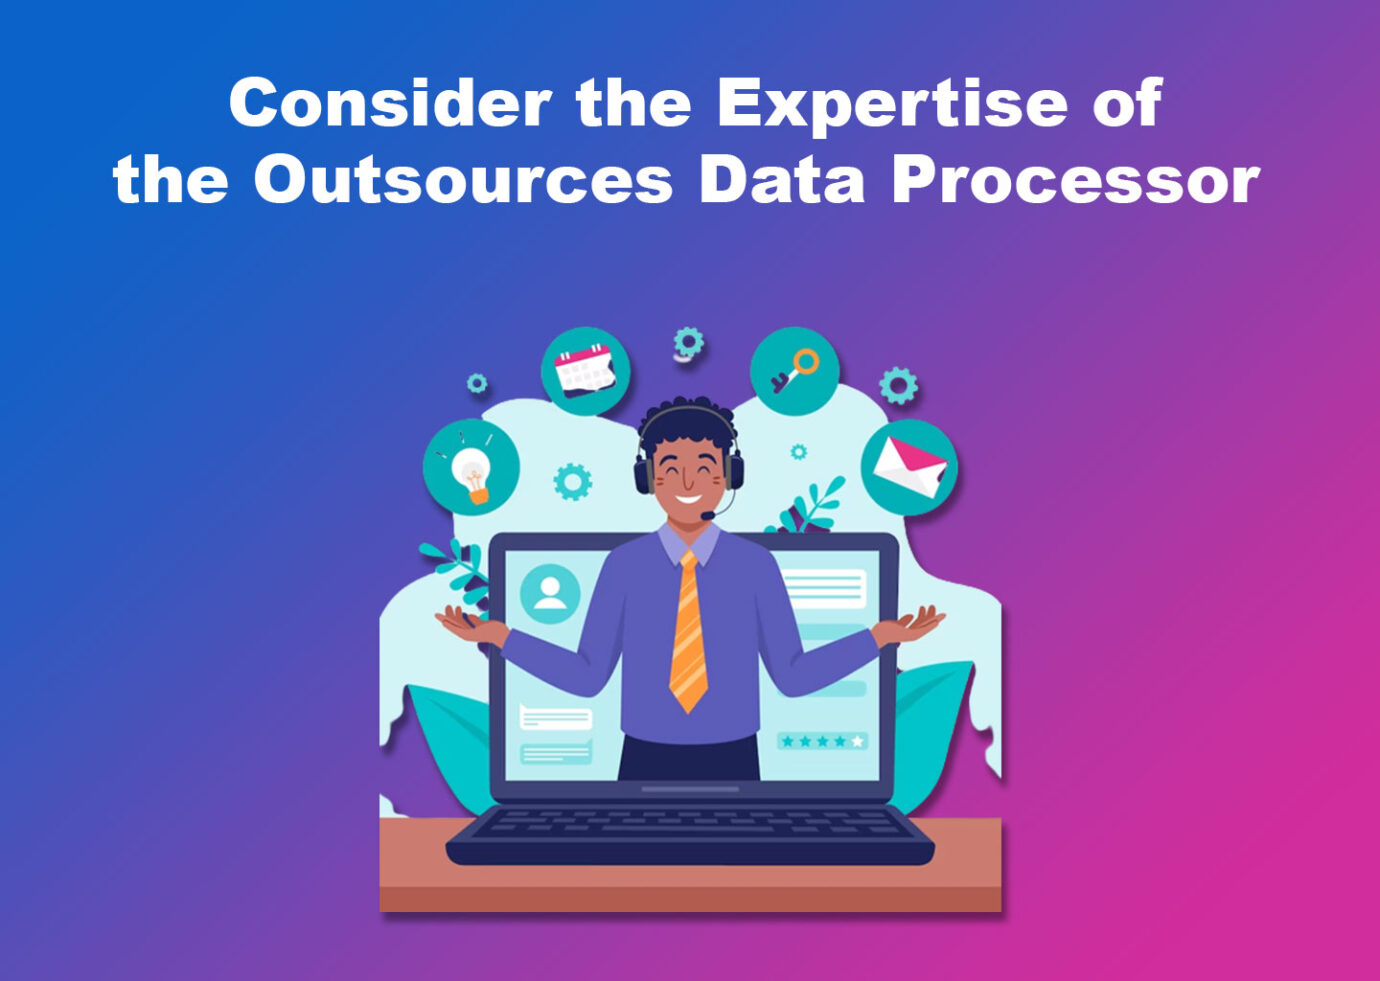 Consider the Expertise of the Outsources Data Processor